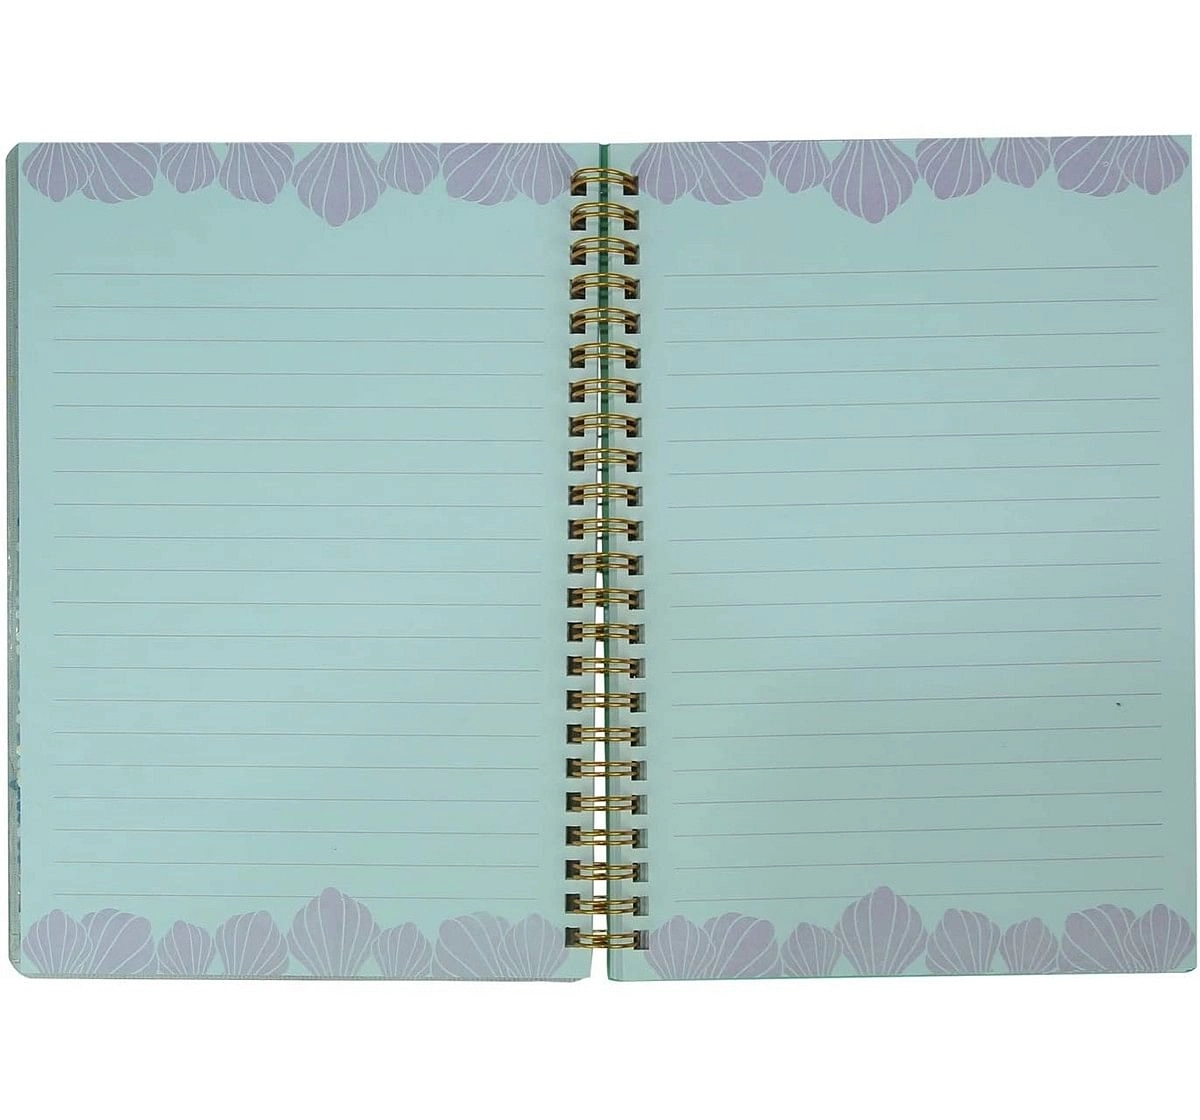 Smily Kiddos Twinkle Metallic Spiral Notebook  Study & Desk Accessories for Kids age 3Y+ 